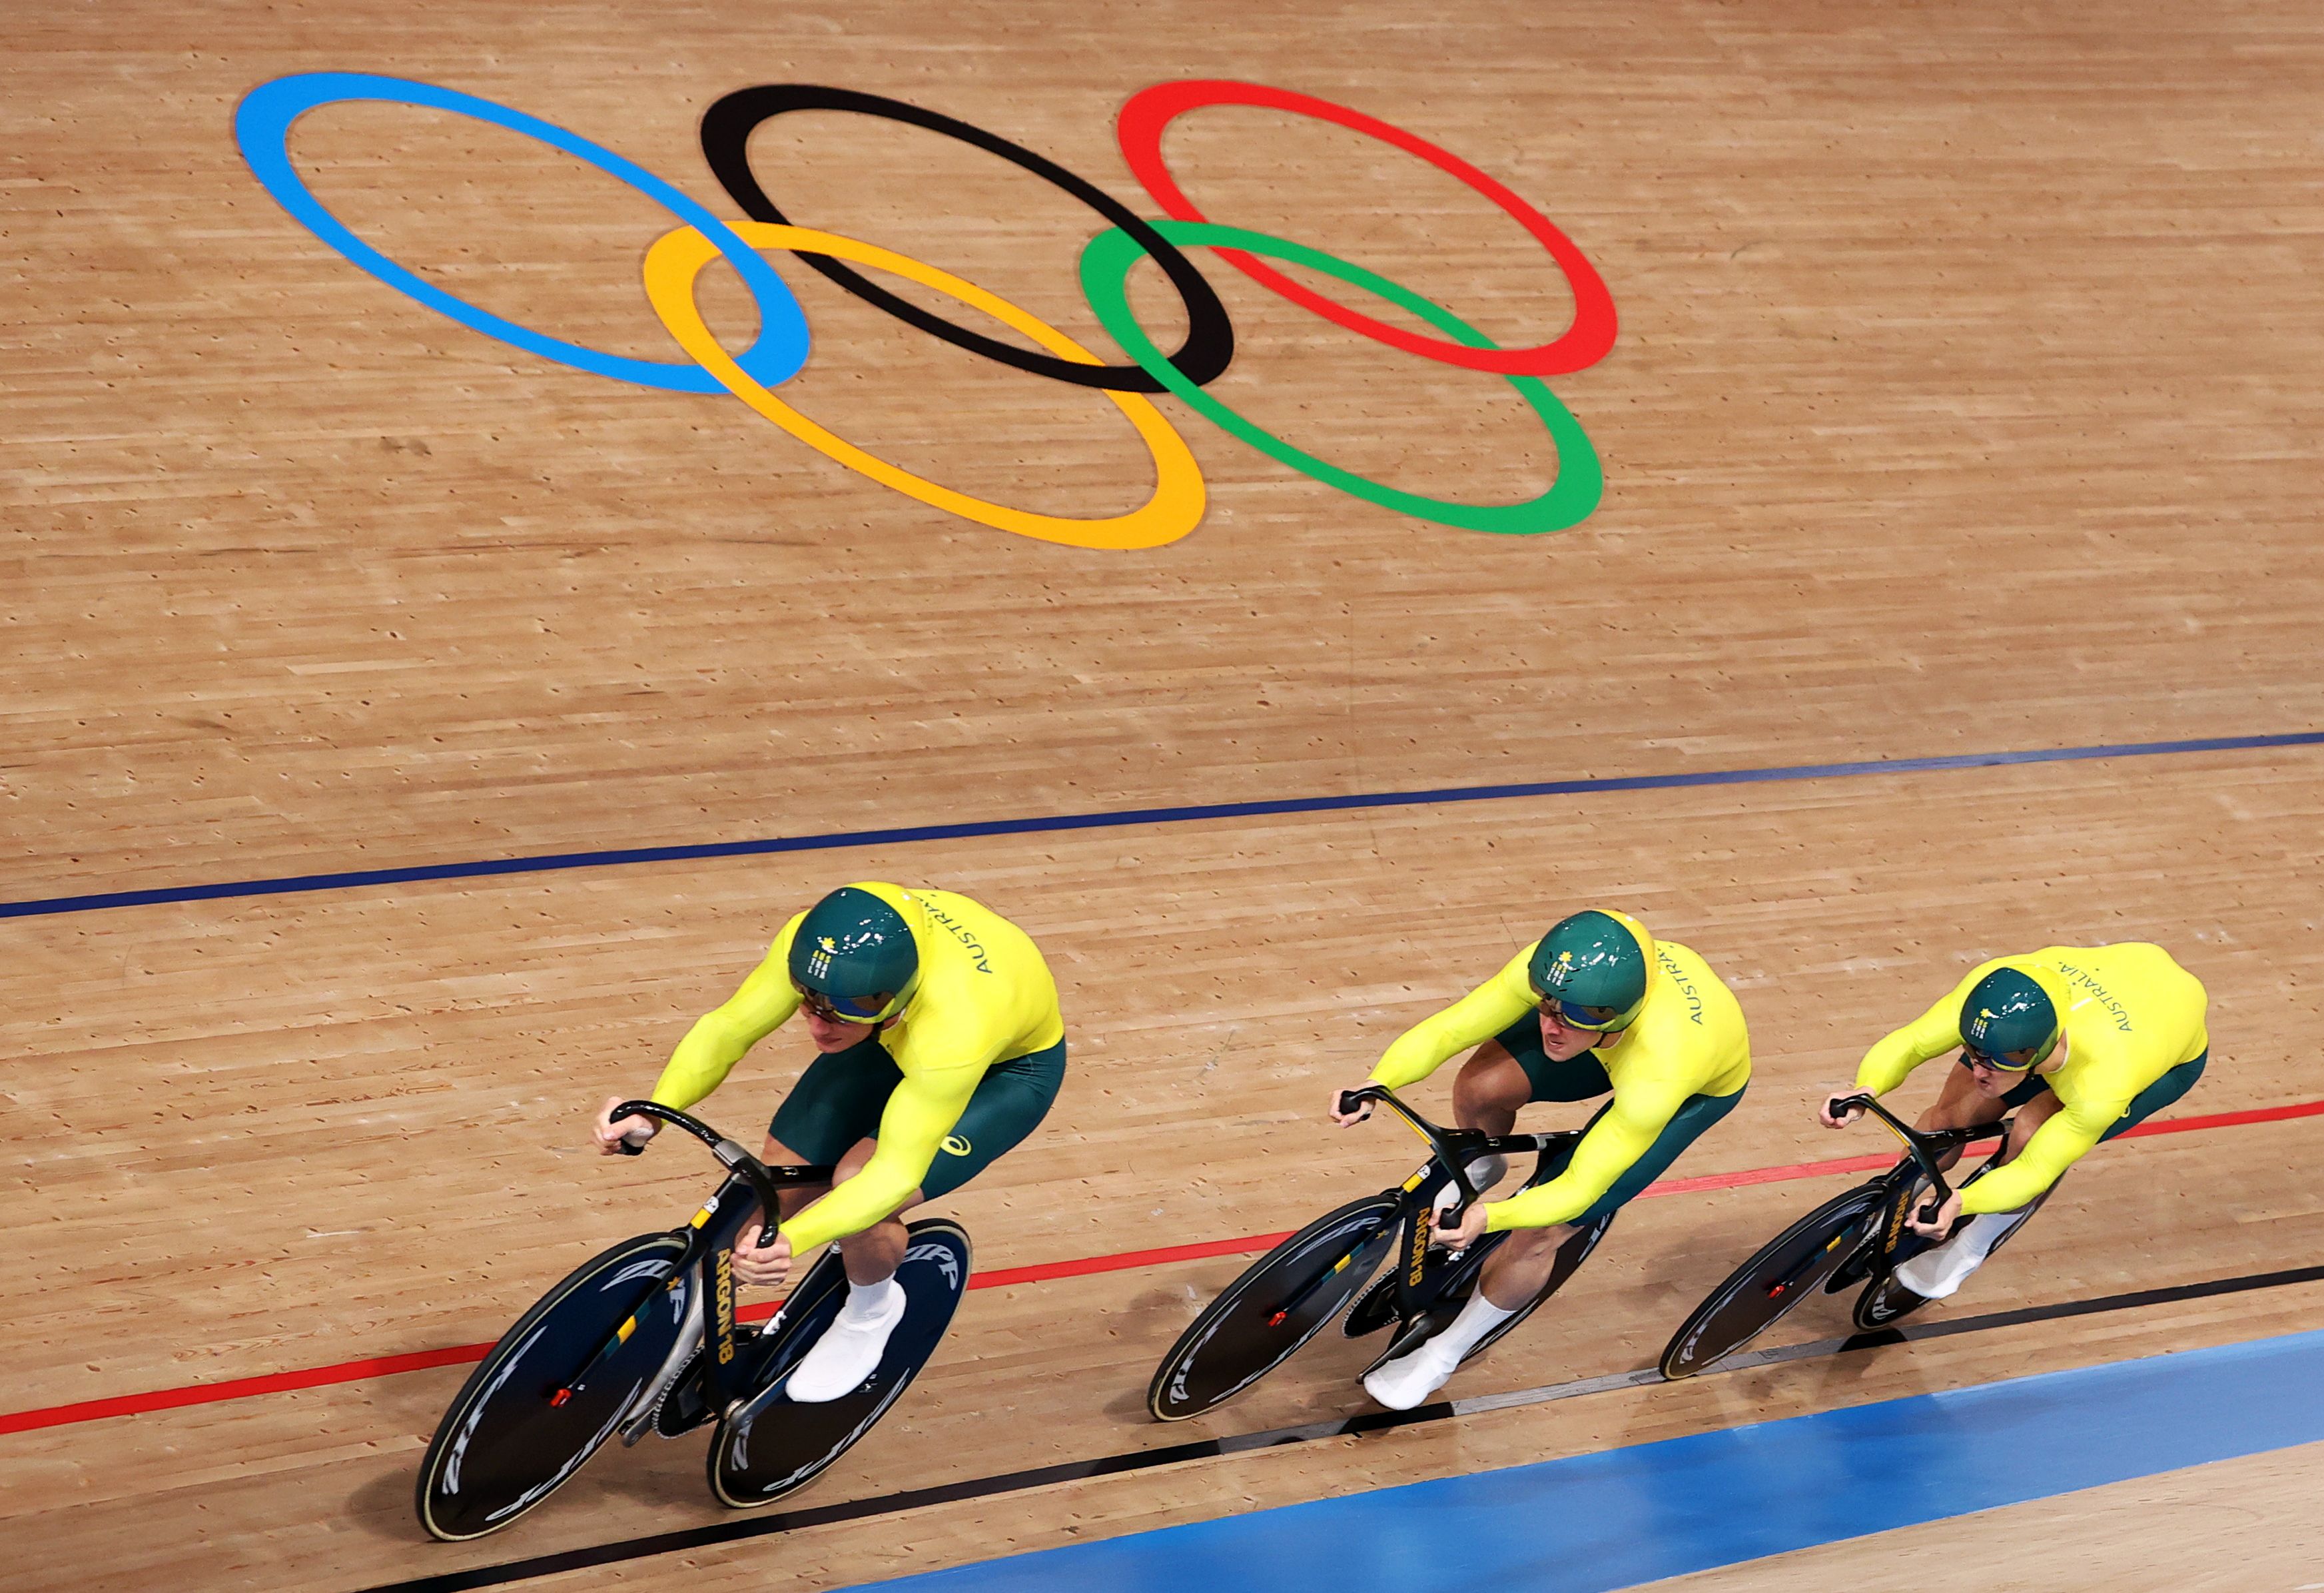 CyclingAustralian Glaetzer withdrawn from track sprint Reuters